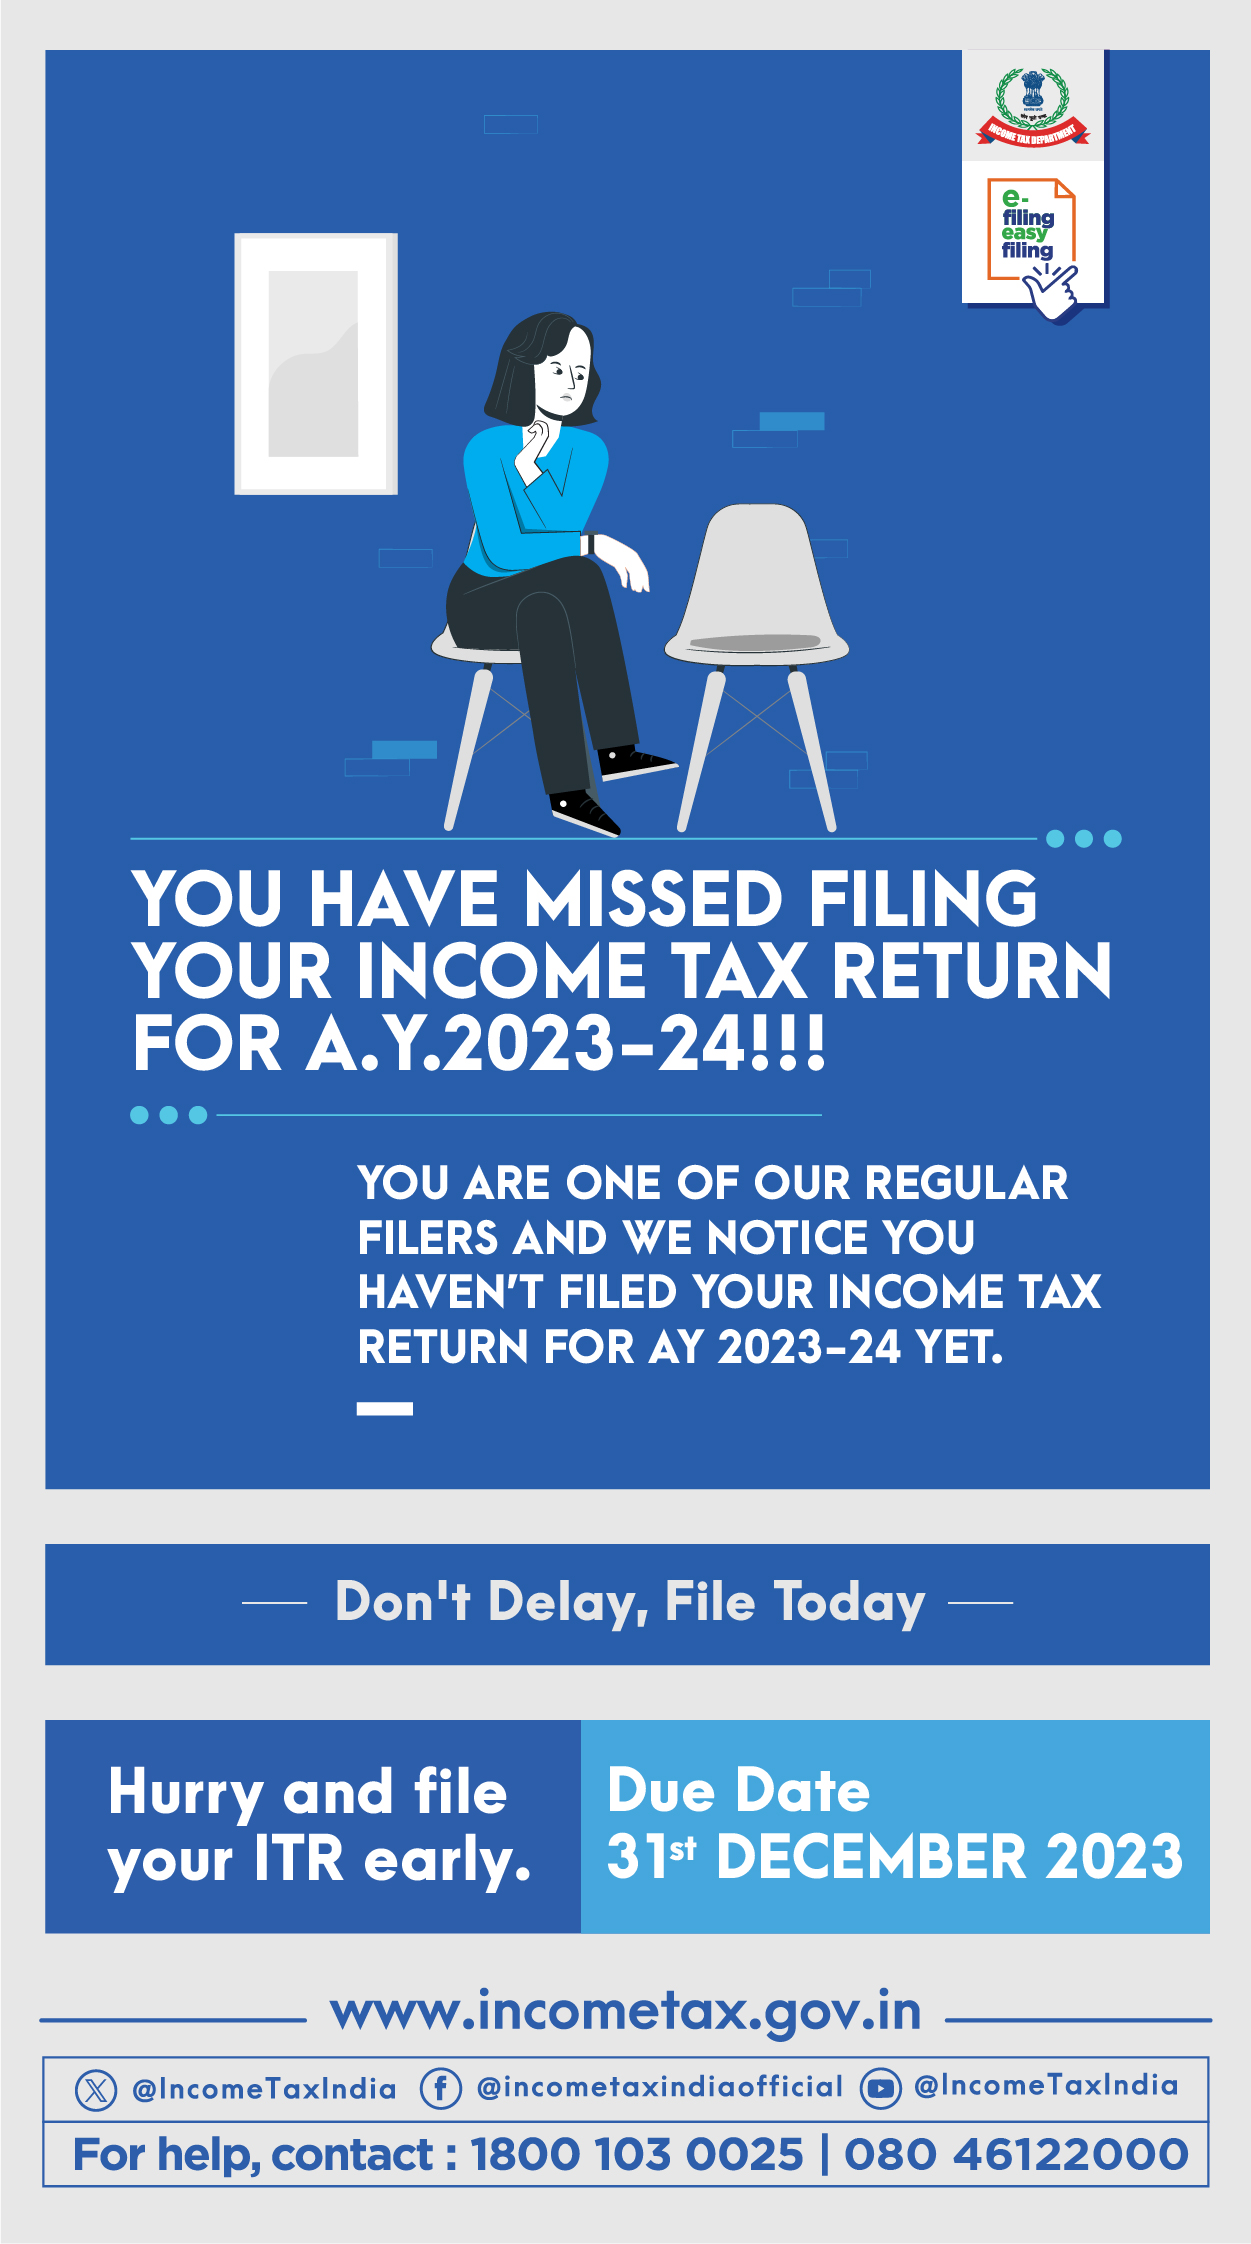  File your Income-Tax return Today